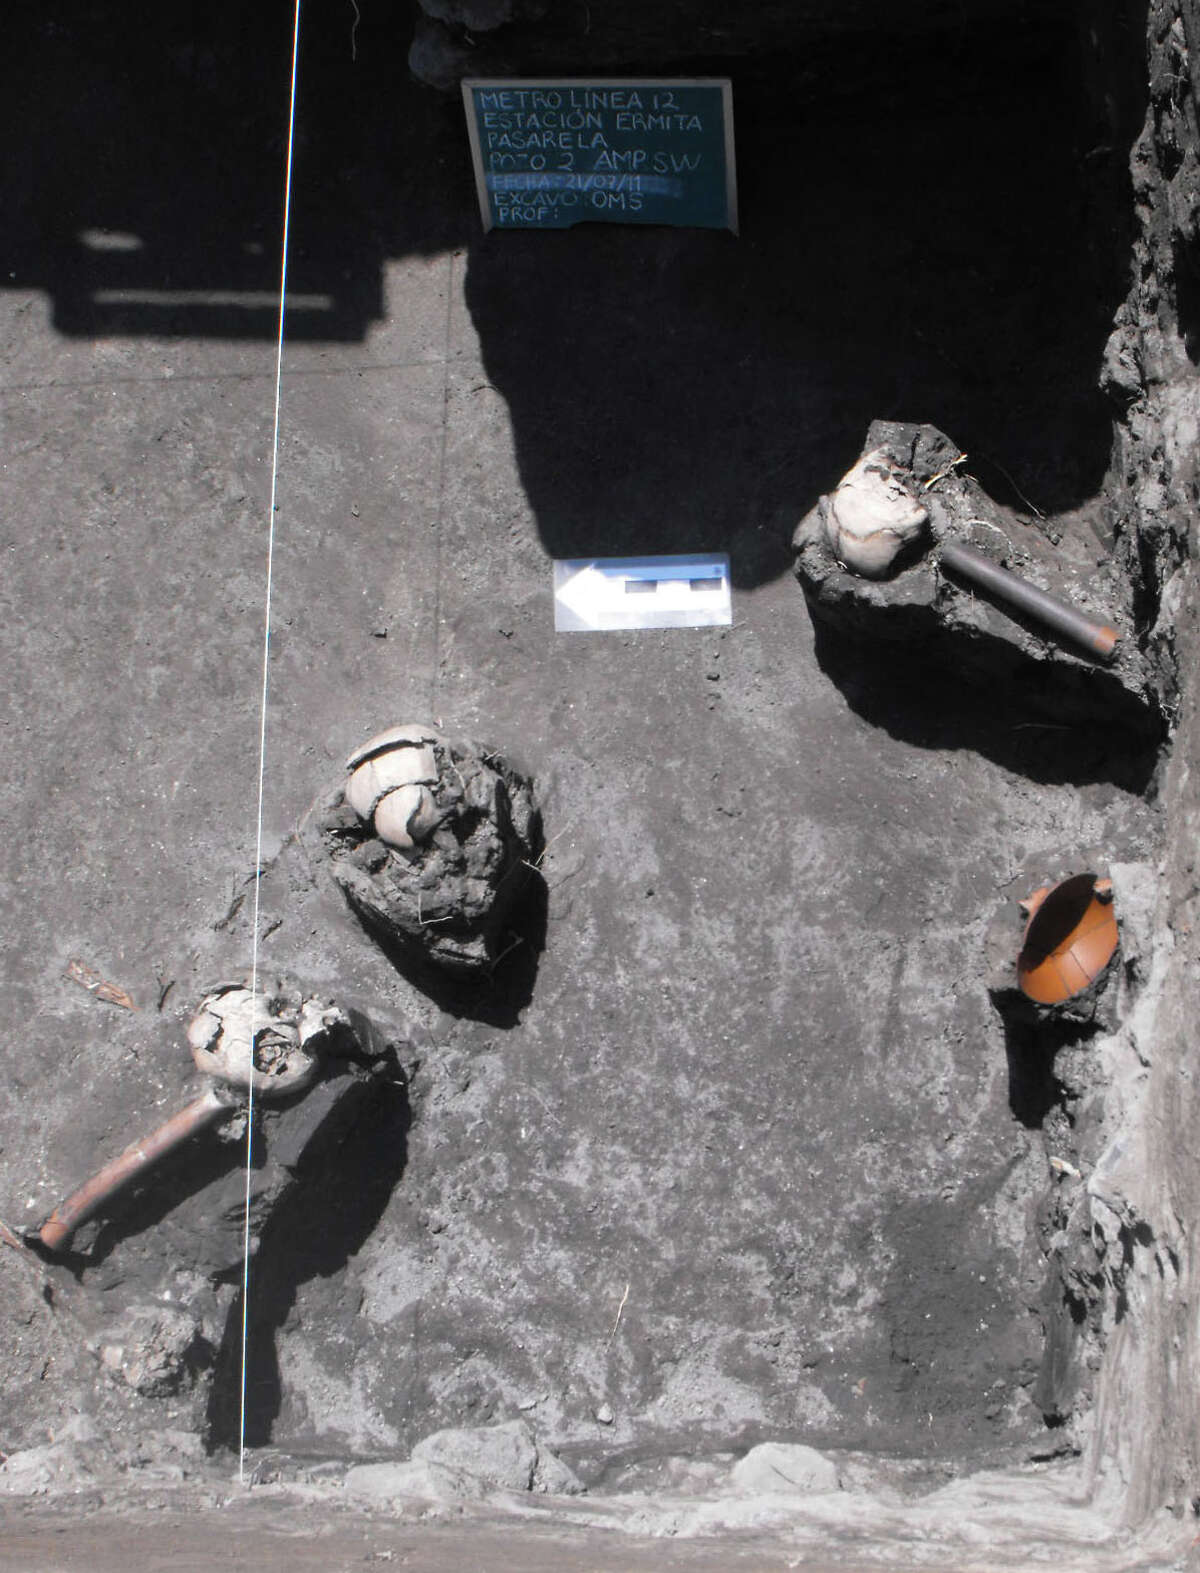 This July 21, 2011 image released by Mexico's National Institute of Anthropology and History (INAH) shows the skeletons of a dog and humans found during excavations for the newest line 12 of the subway in Mexico City. Archaeologists say the dog's skull had holes, that indicate it was displayed on a ritual Aztec skull rack normally reserved for human sacrifice victims. (AP Photo/INAH)